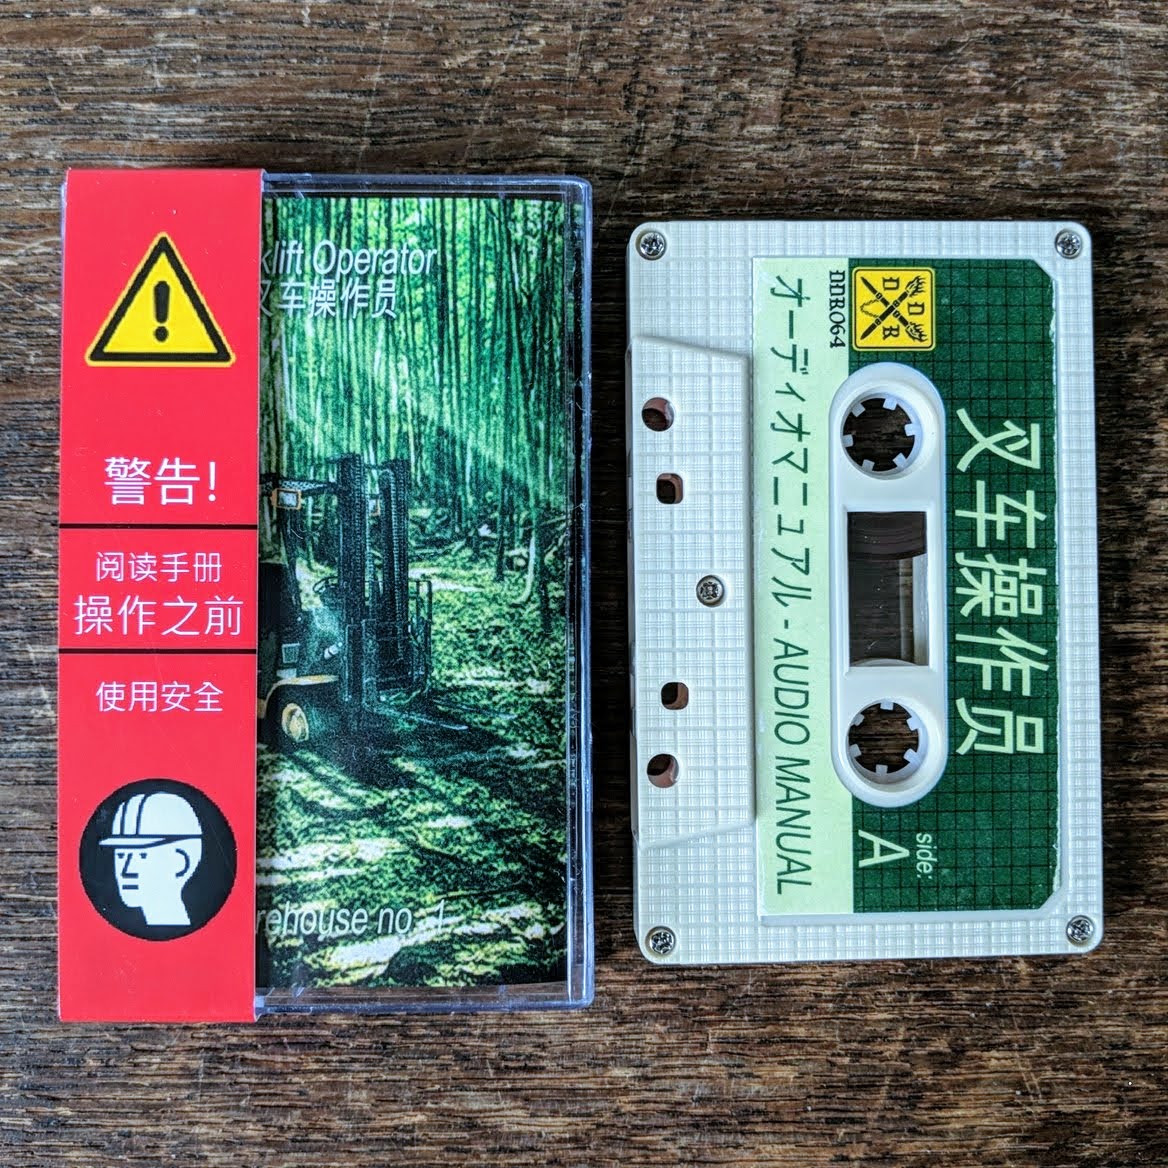 [SOLD OUT] FORKLIFT OPERATOR "Warehouse No. 1" Cassette Tape